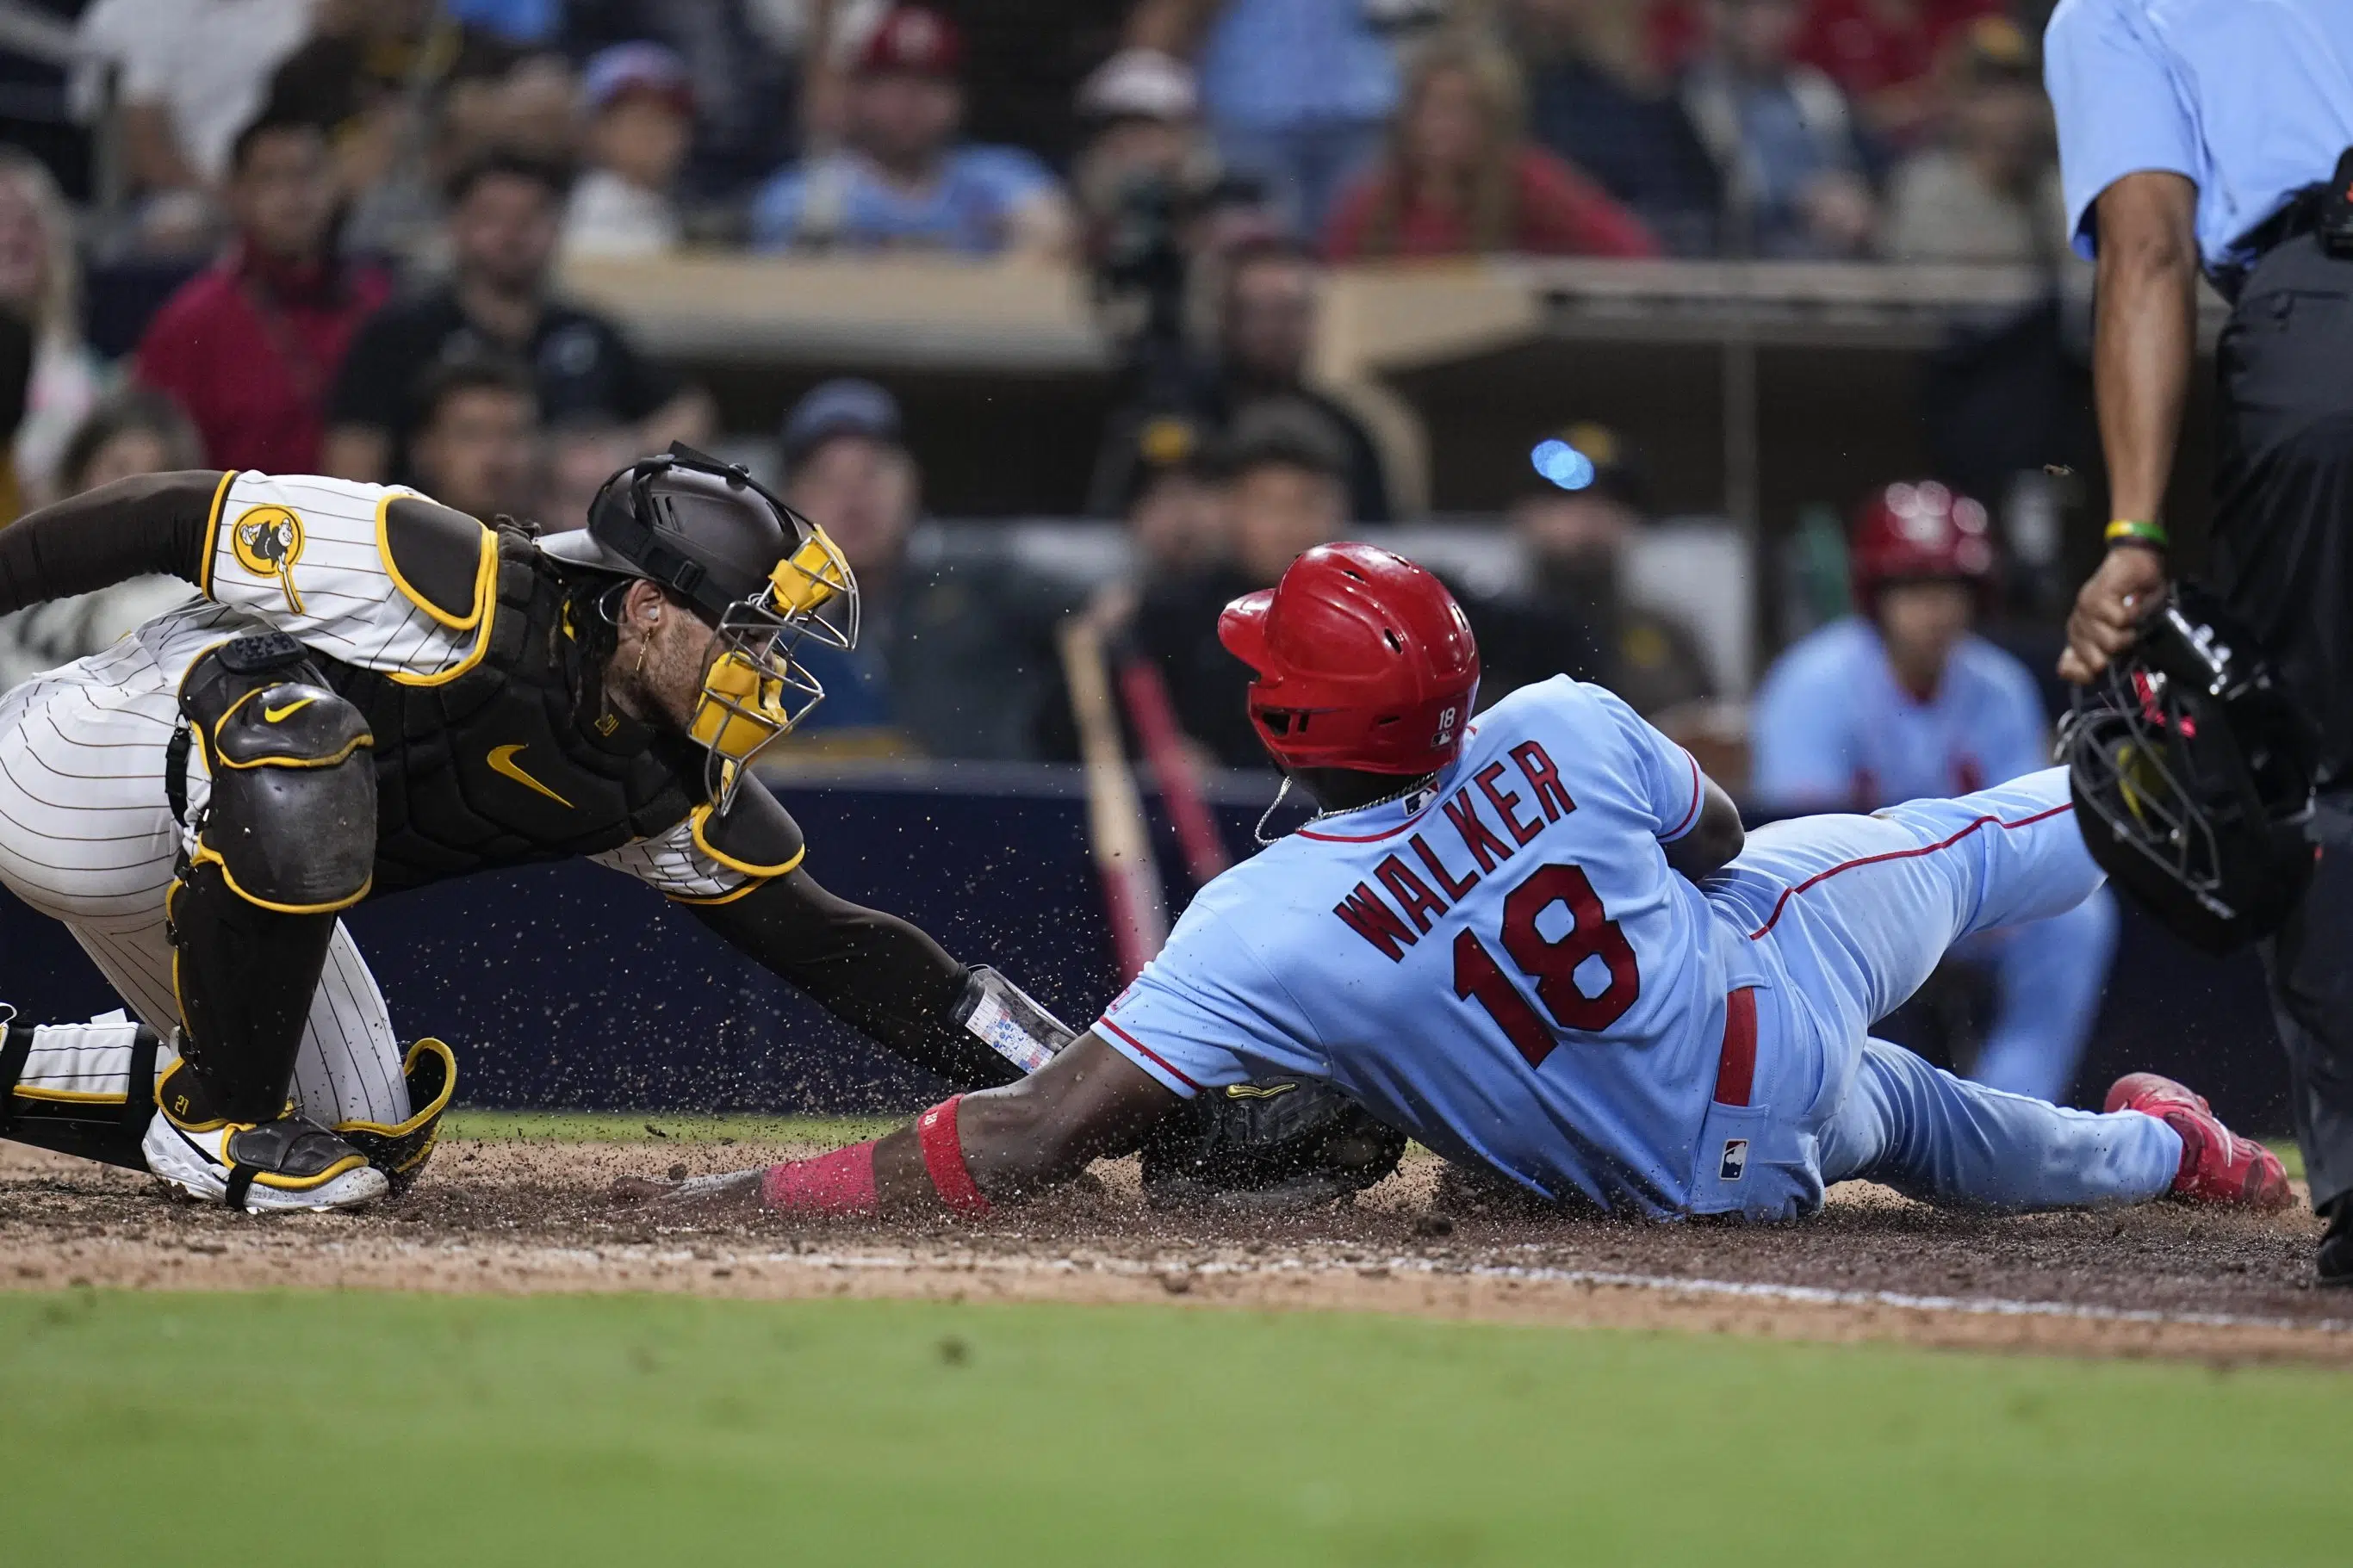 Padres drop to 0-12 in extra innings, matching 1969 Expos, with 5-2 loss to  Cardinals